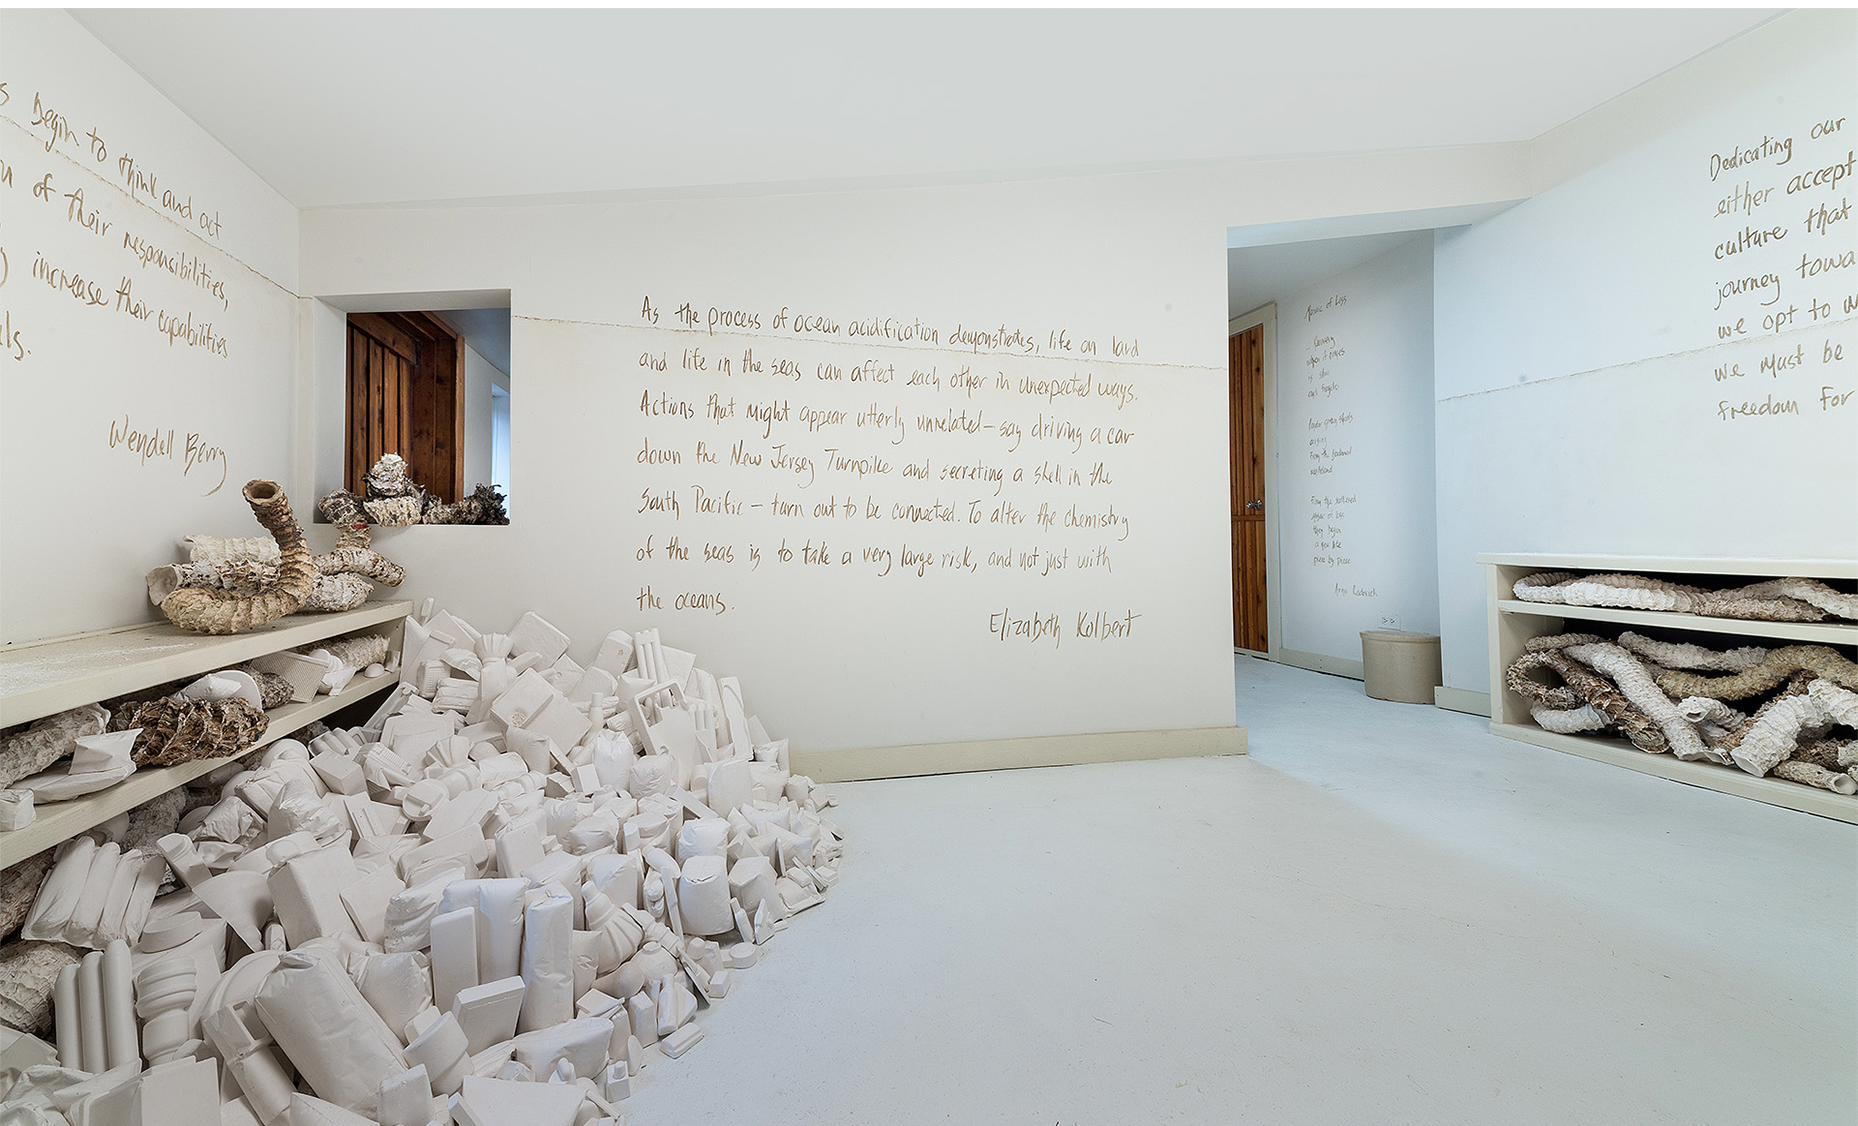  Installation view of consumer goods casts “washed up” against the bookcase with text by Elizabeth Kolbert. 